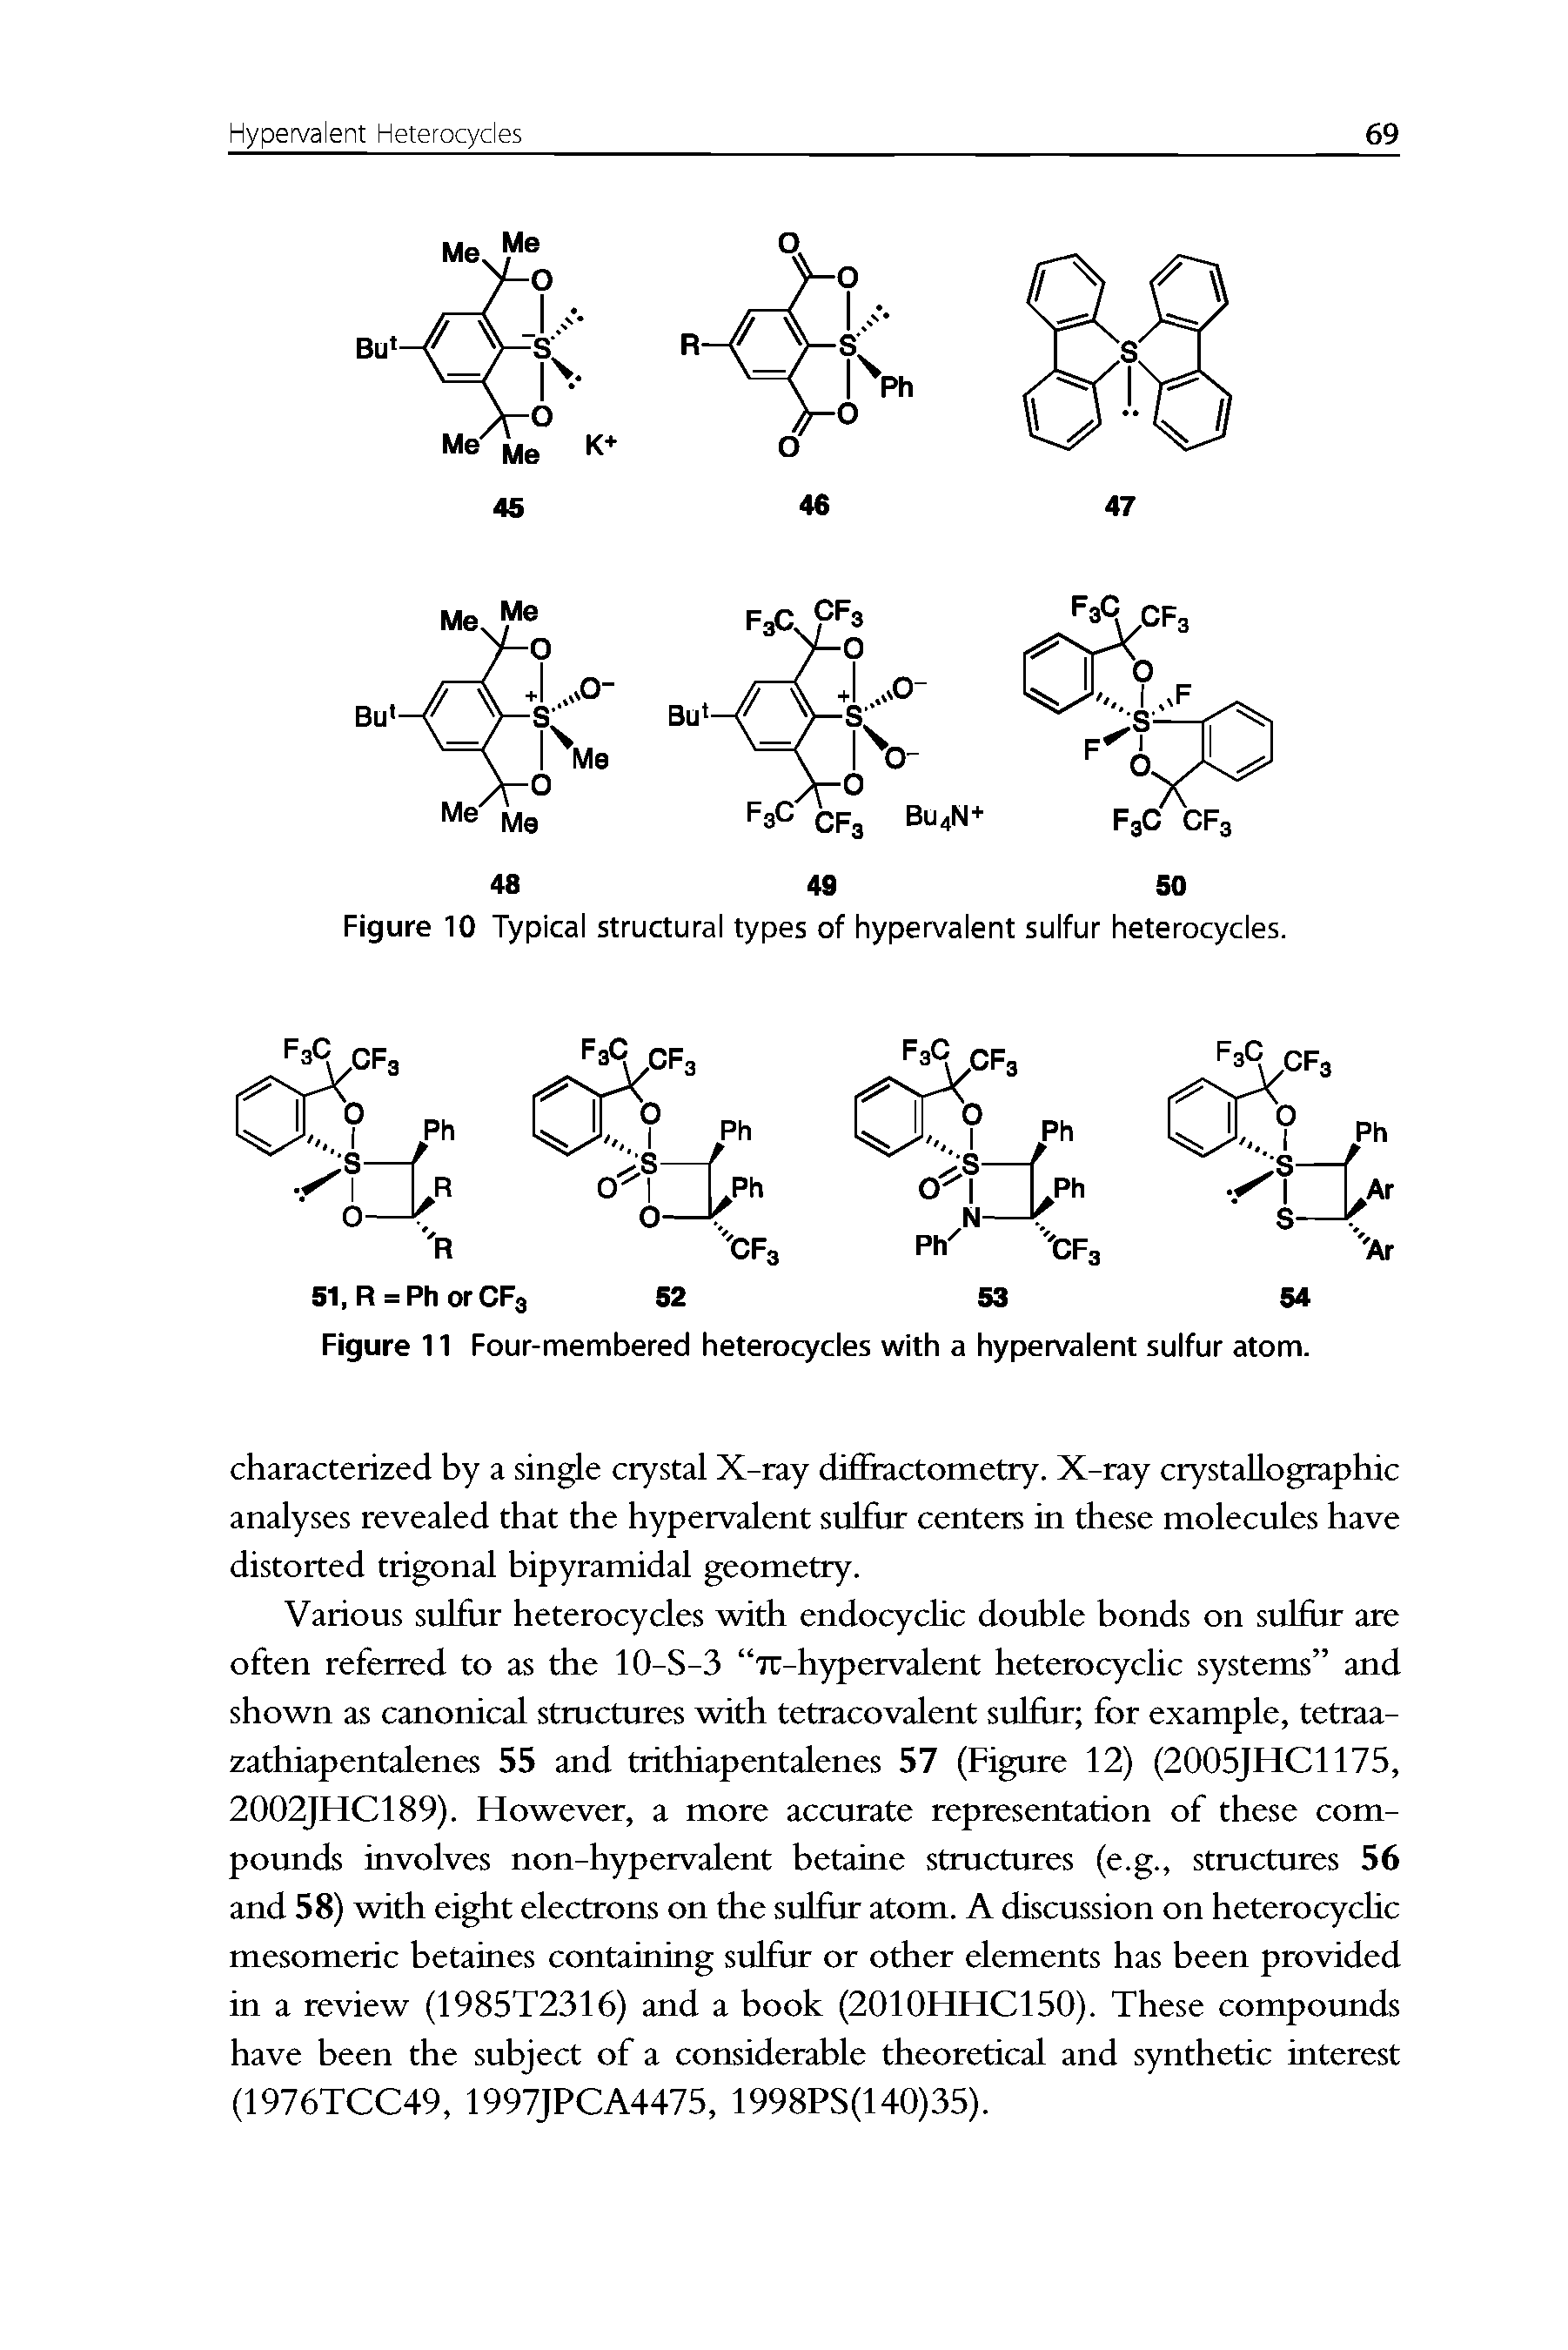 Figure 10 Typical structural types of hypervalent sulfur heterocycles.